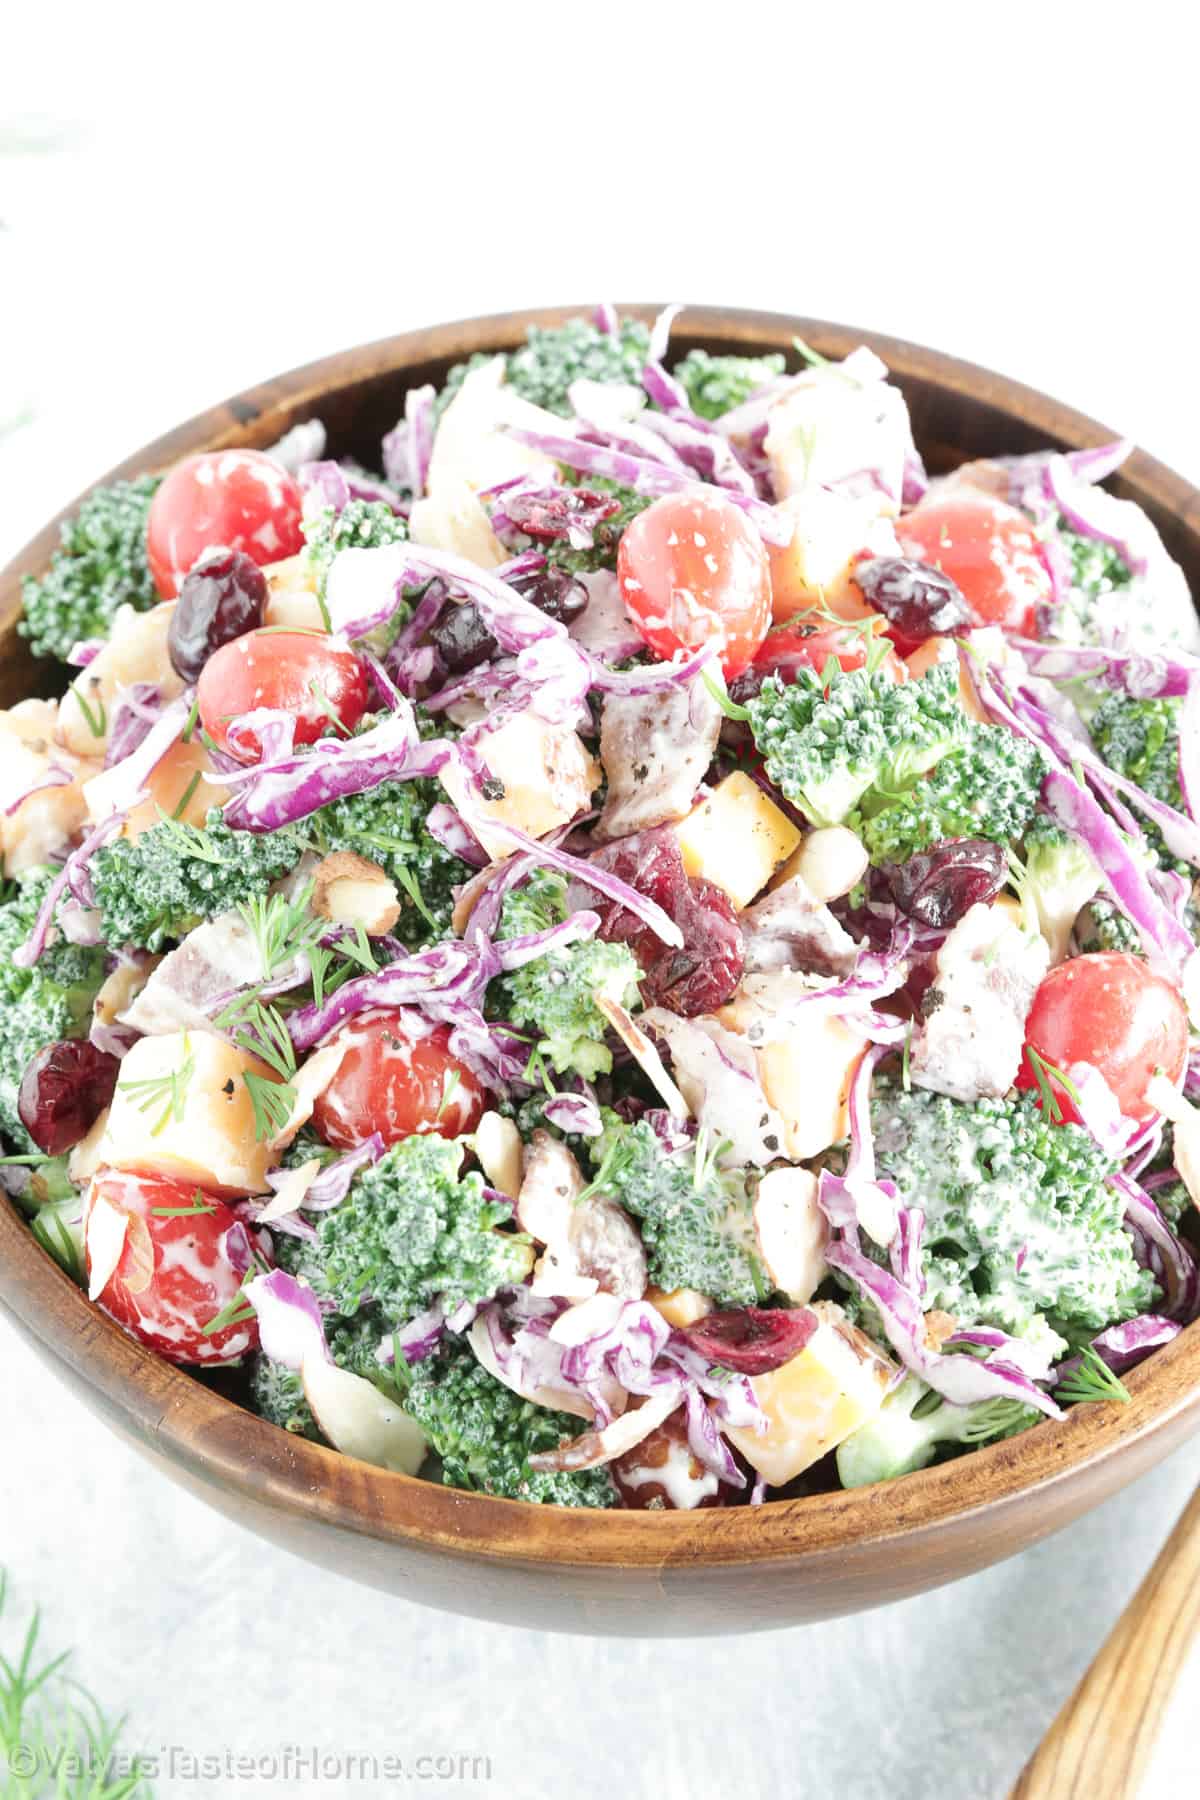 Broccoli tomato salad is a delicious and nutritious side dish that combines fresh broccoli florets with juicy cherry tomatoes, crunchy red cabbage, and a creamy dressing.